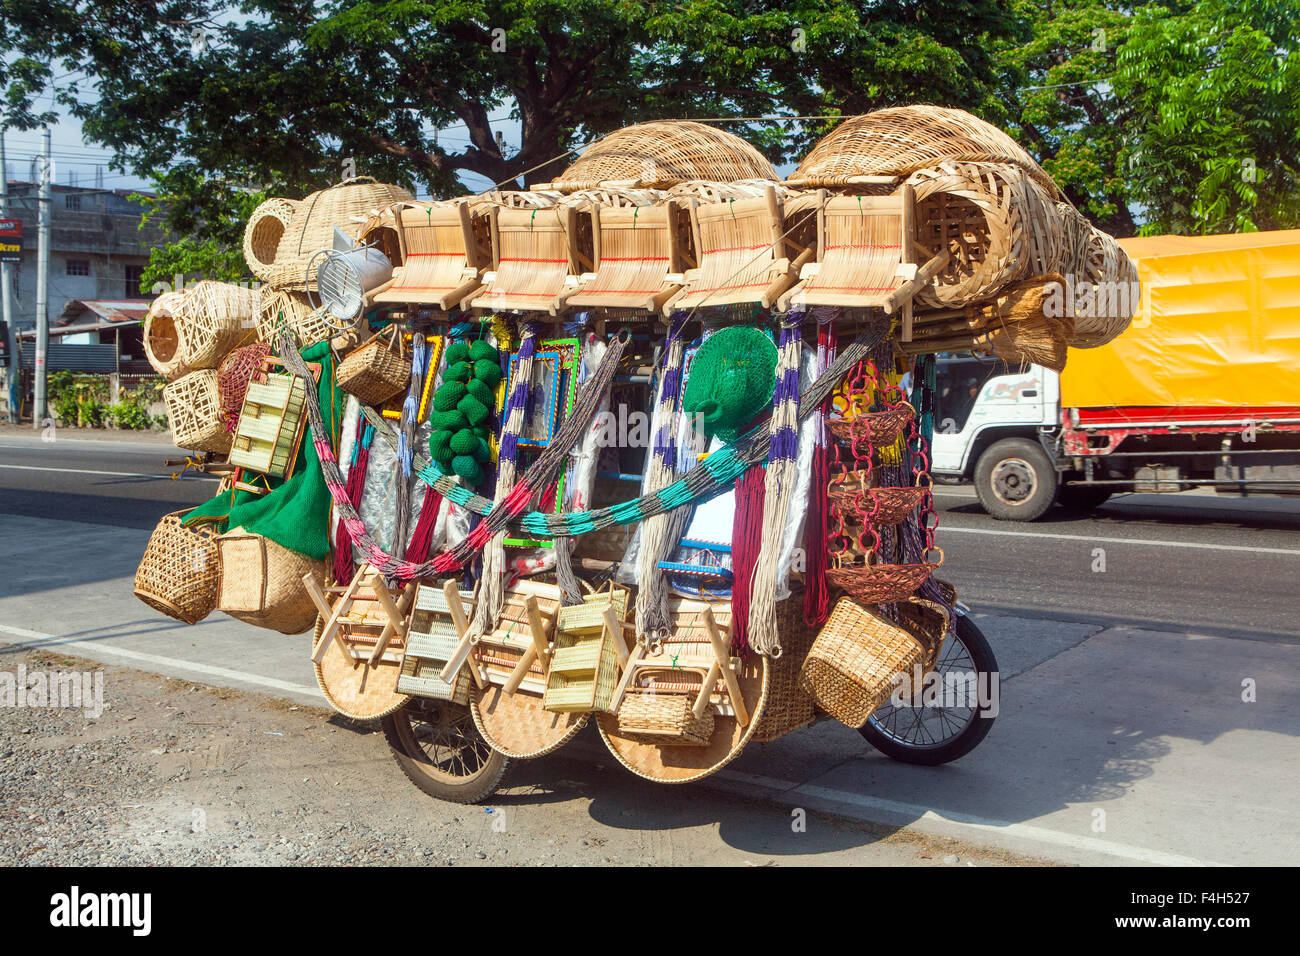 Filipino sells woven rattan baskets and other household items on the side of a road from his heavily loaded motorcycle. Stock Photo